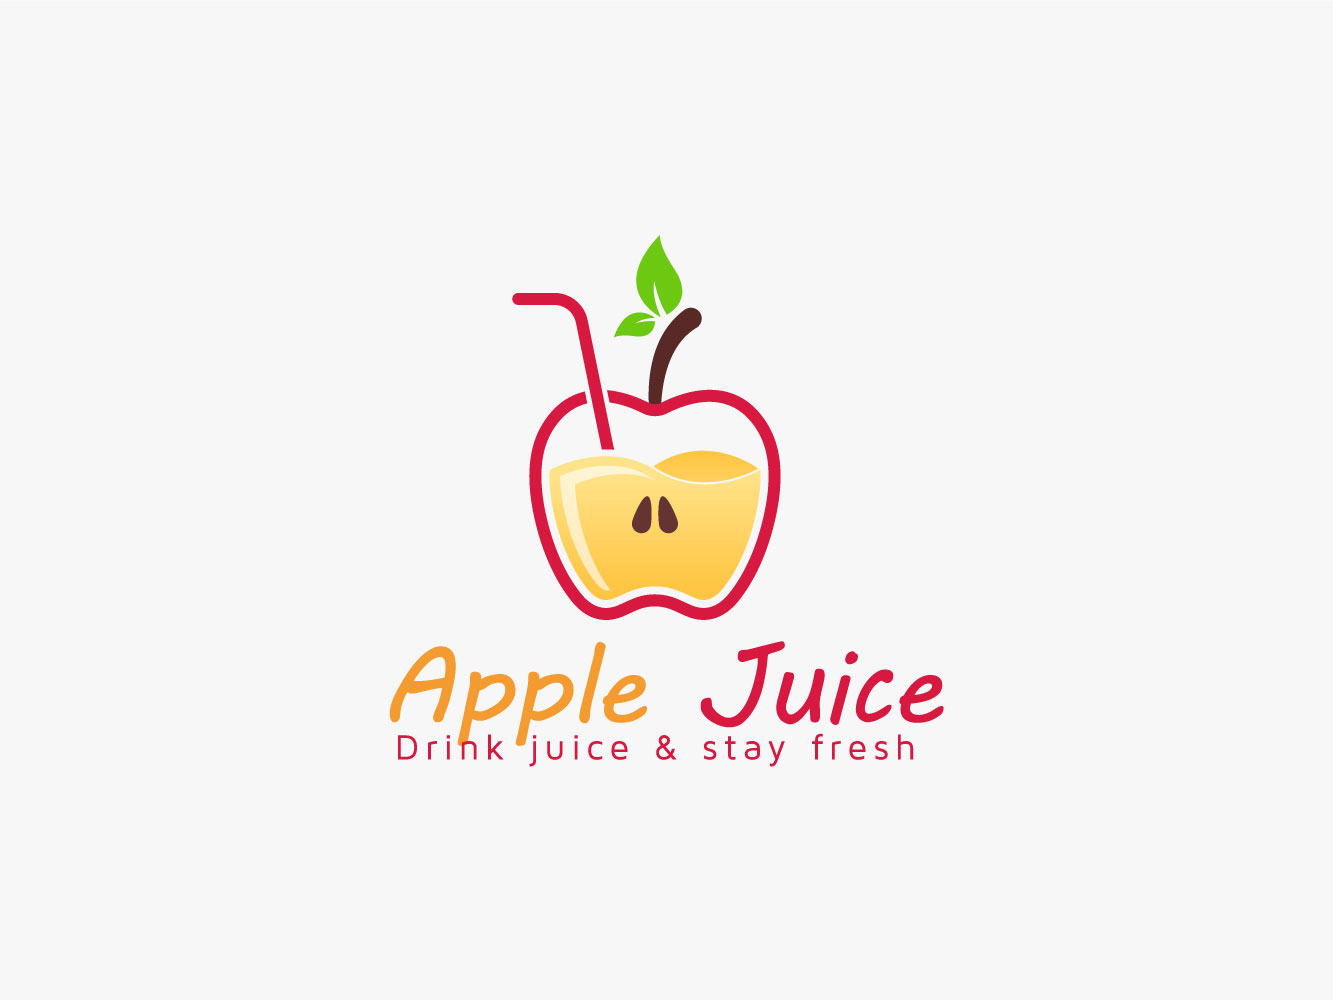 Fruit Juice Logo Concept For Apple With Glass Vector Design.